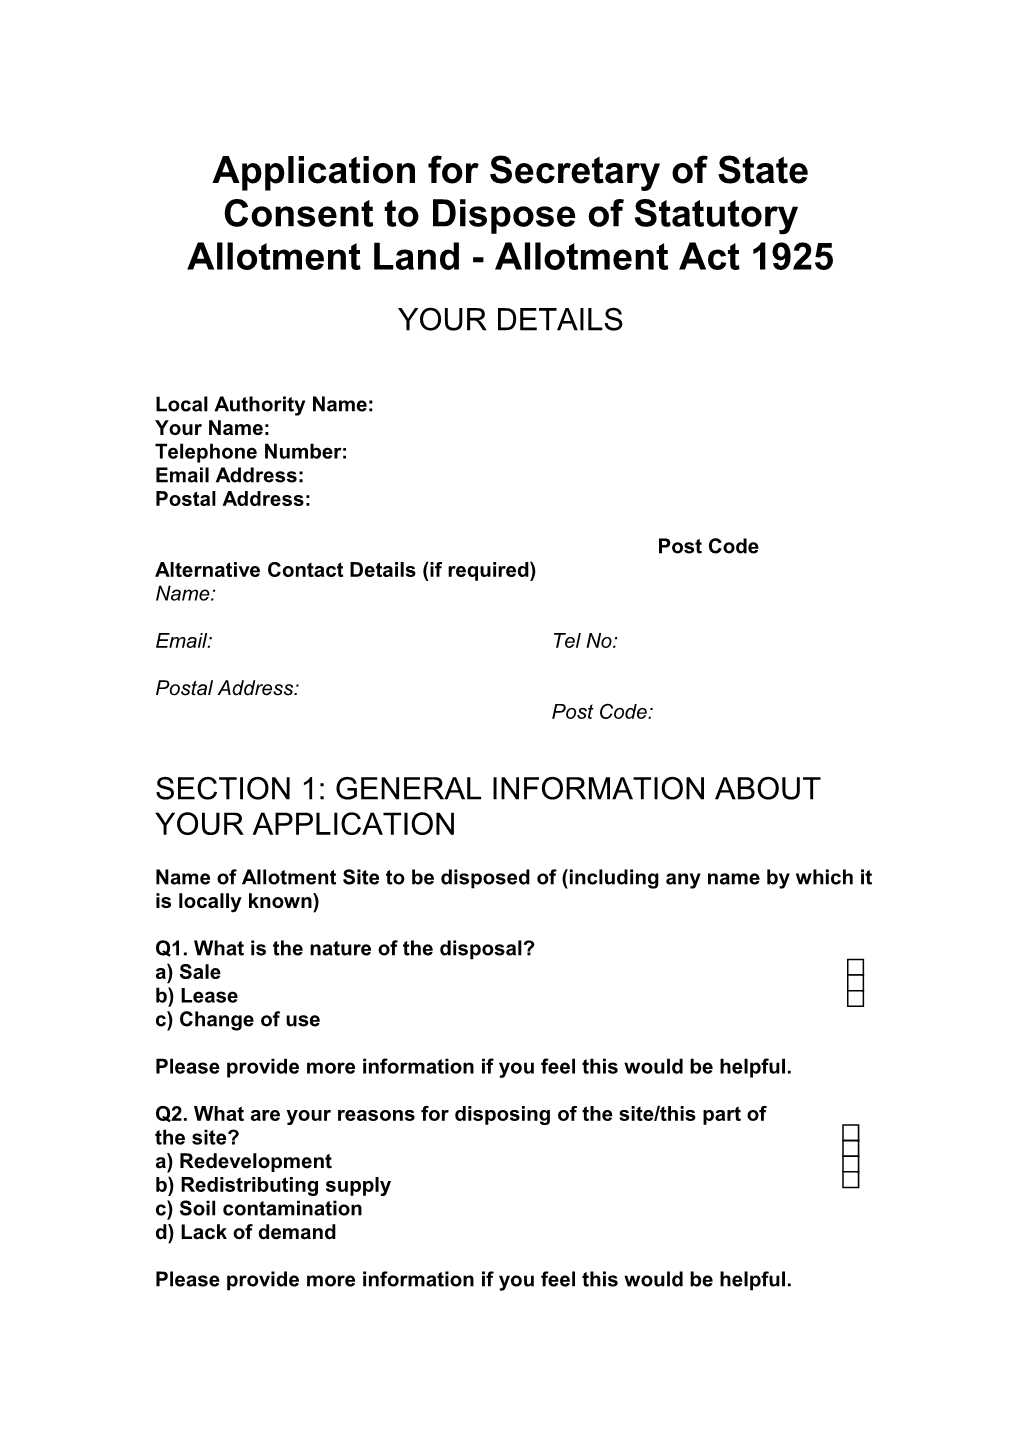 Application for Secretary of State Consent to Dispose of Statutory Allotment Land